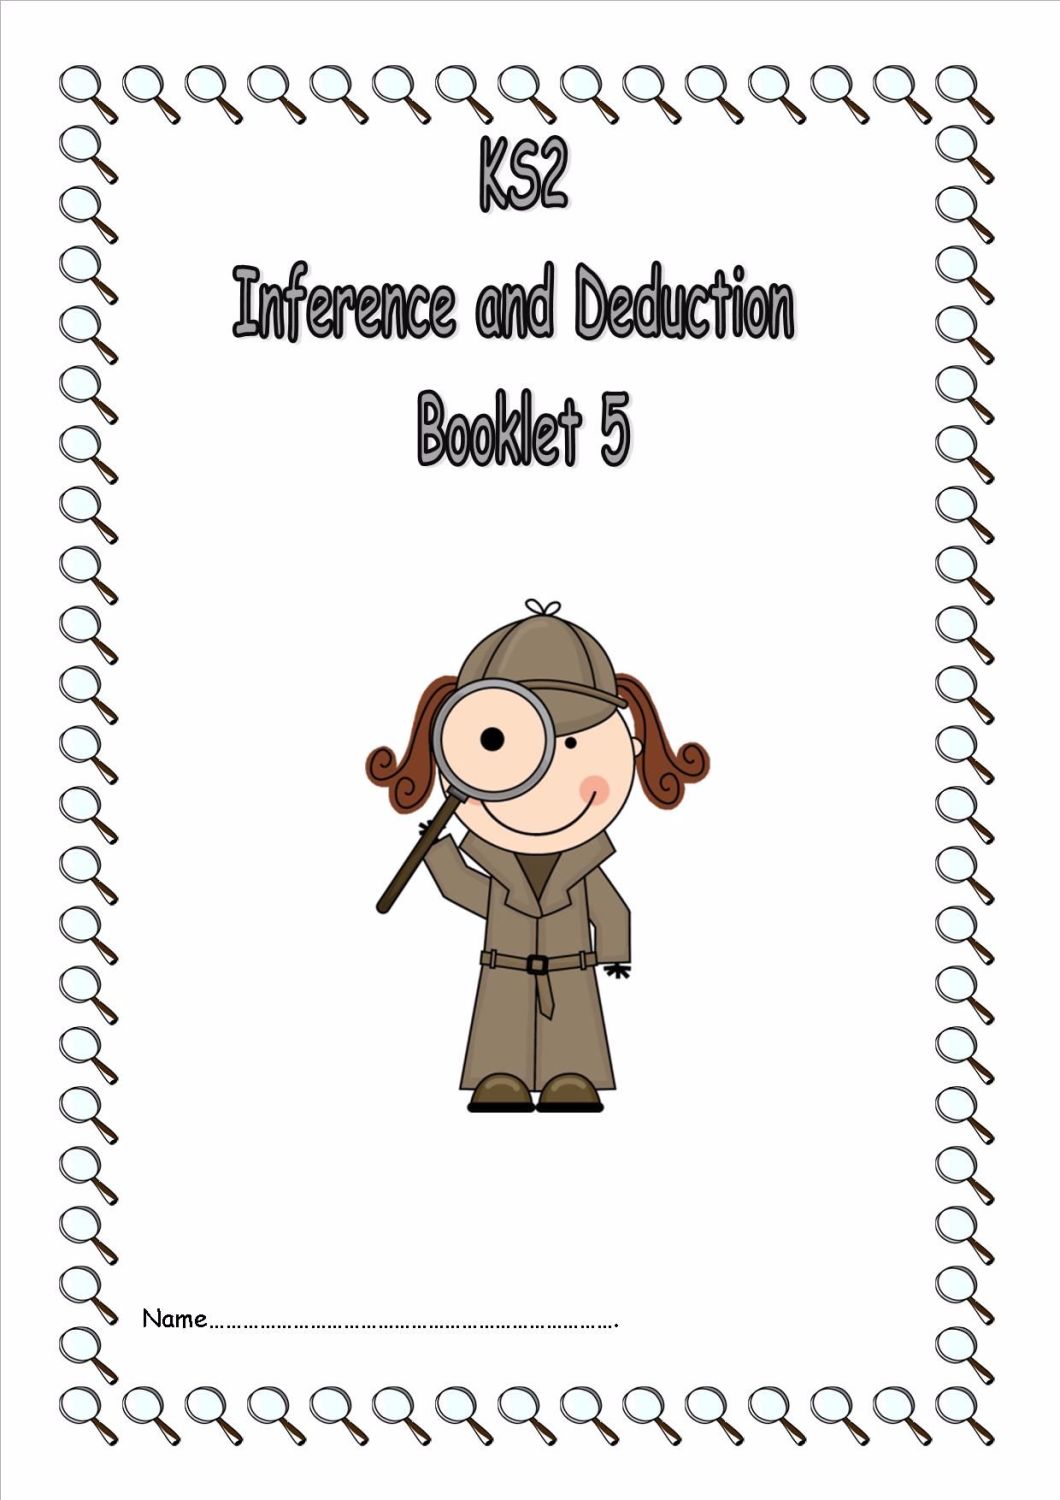 KS2 Inference and Deduction Booklet 4 